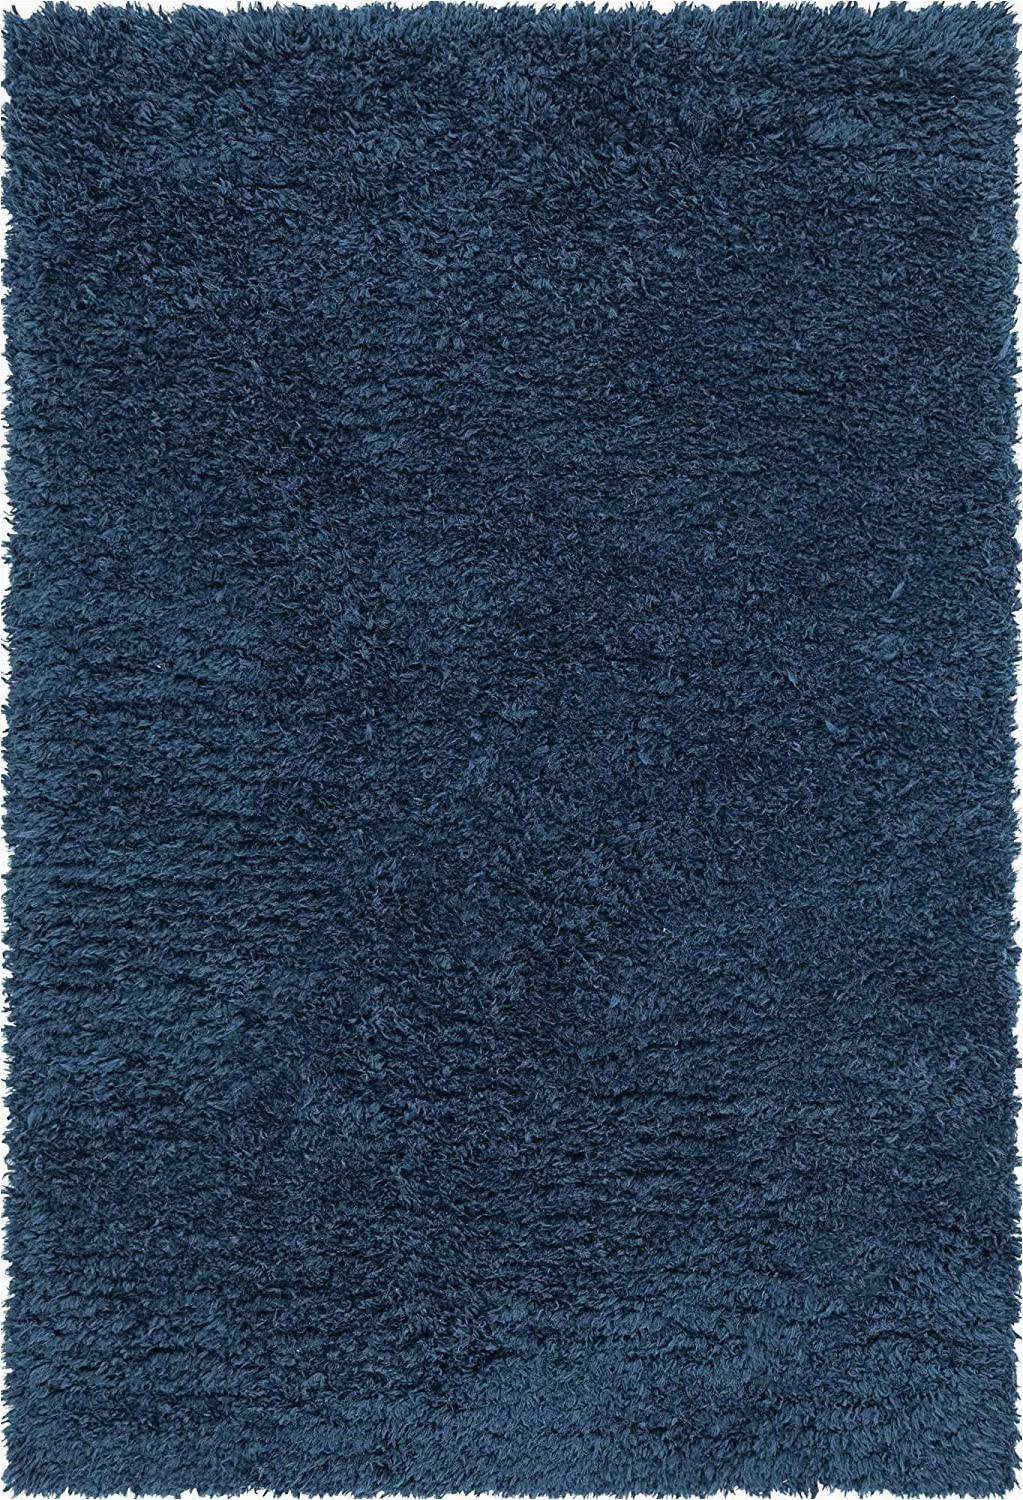 Plush Navy Blue Rug Infinity Collection solid Shag area Rug by Rugs – Cobalt 4 X 6 High Pile Plush Shag Rug Perfect for Entryways Bedrooms Living Rooms and More